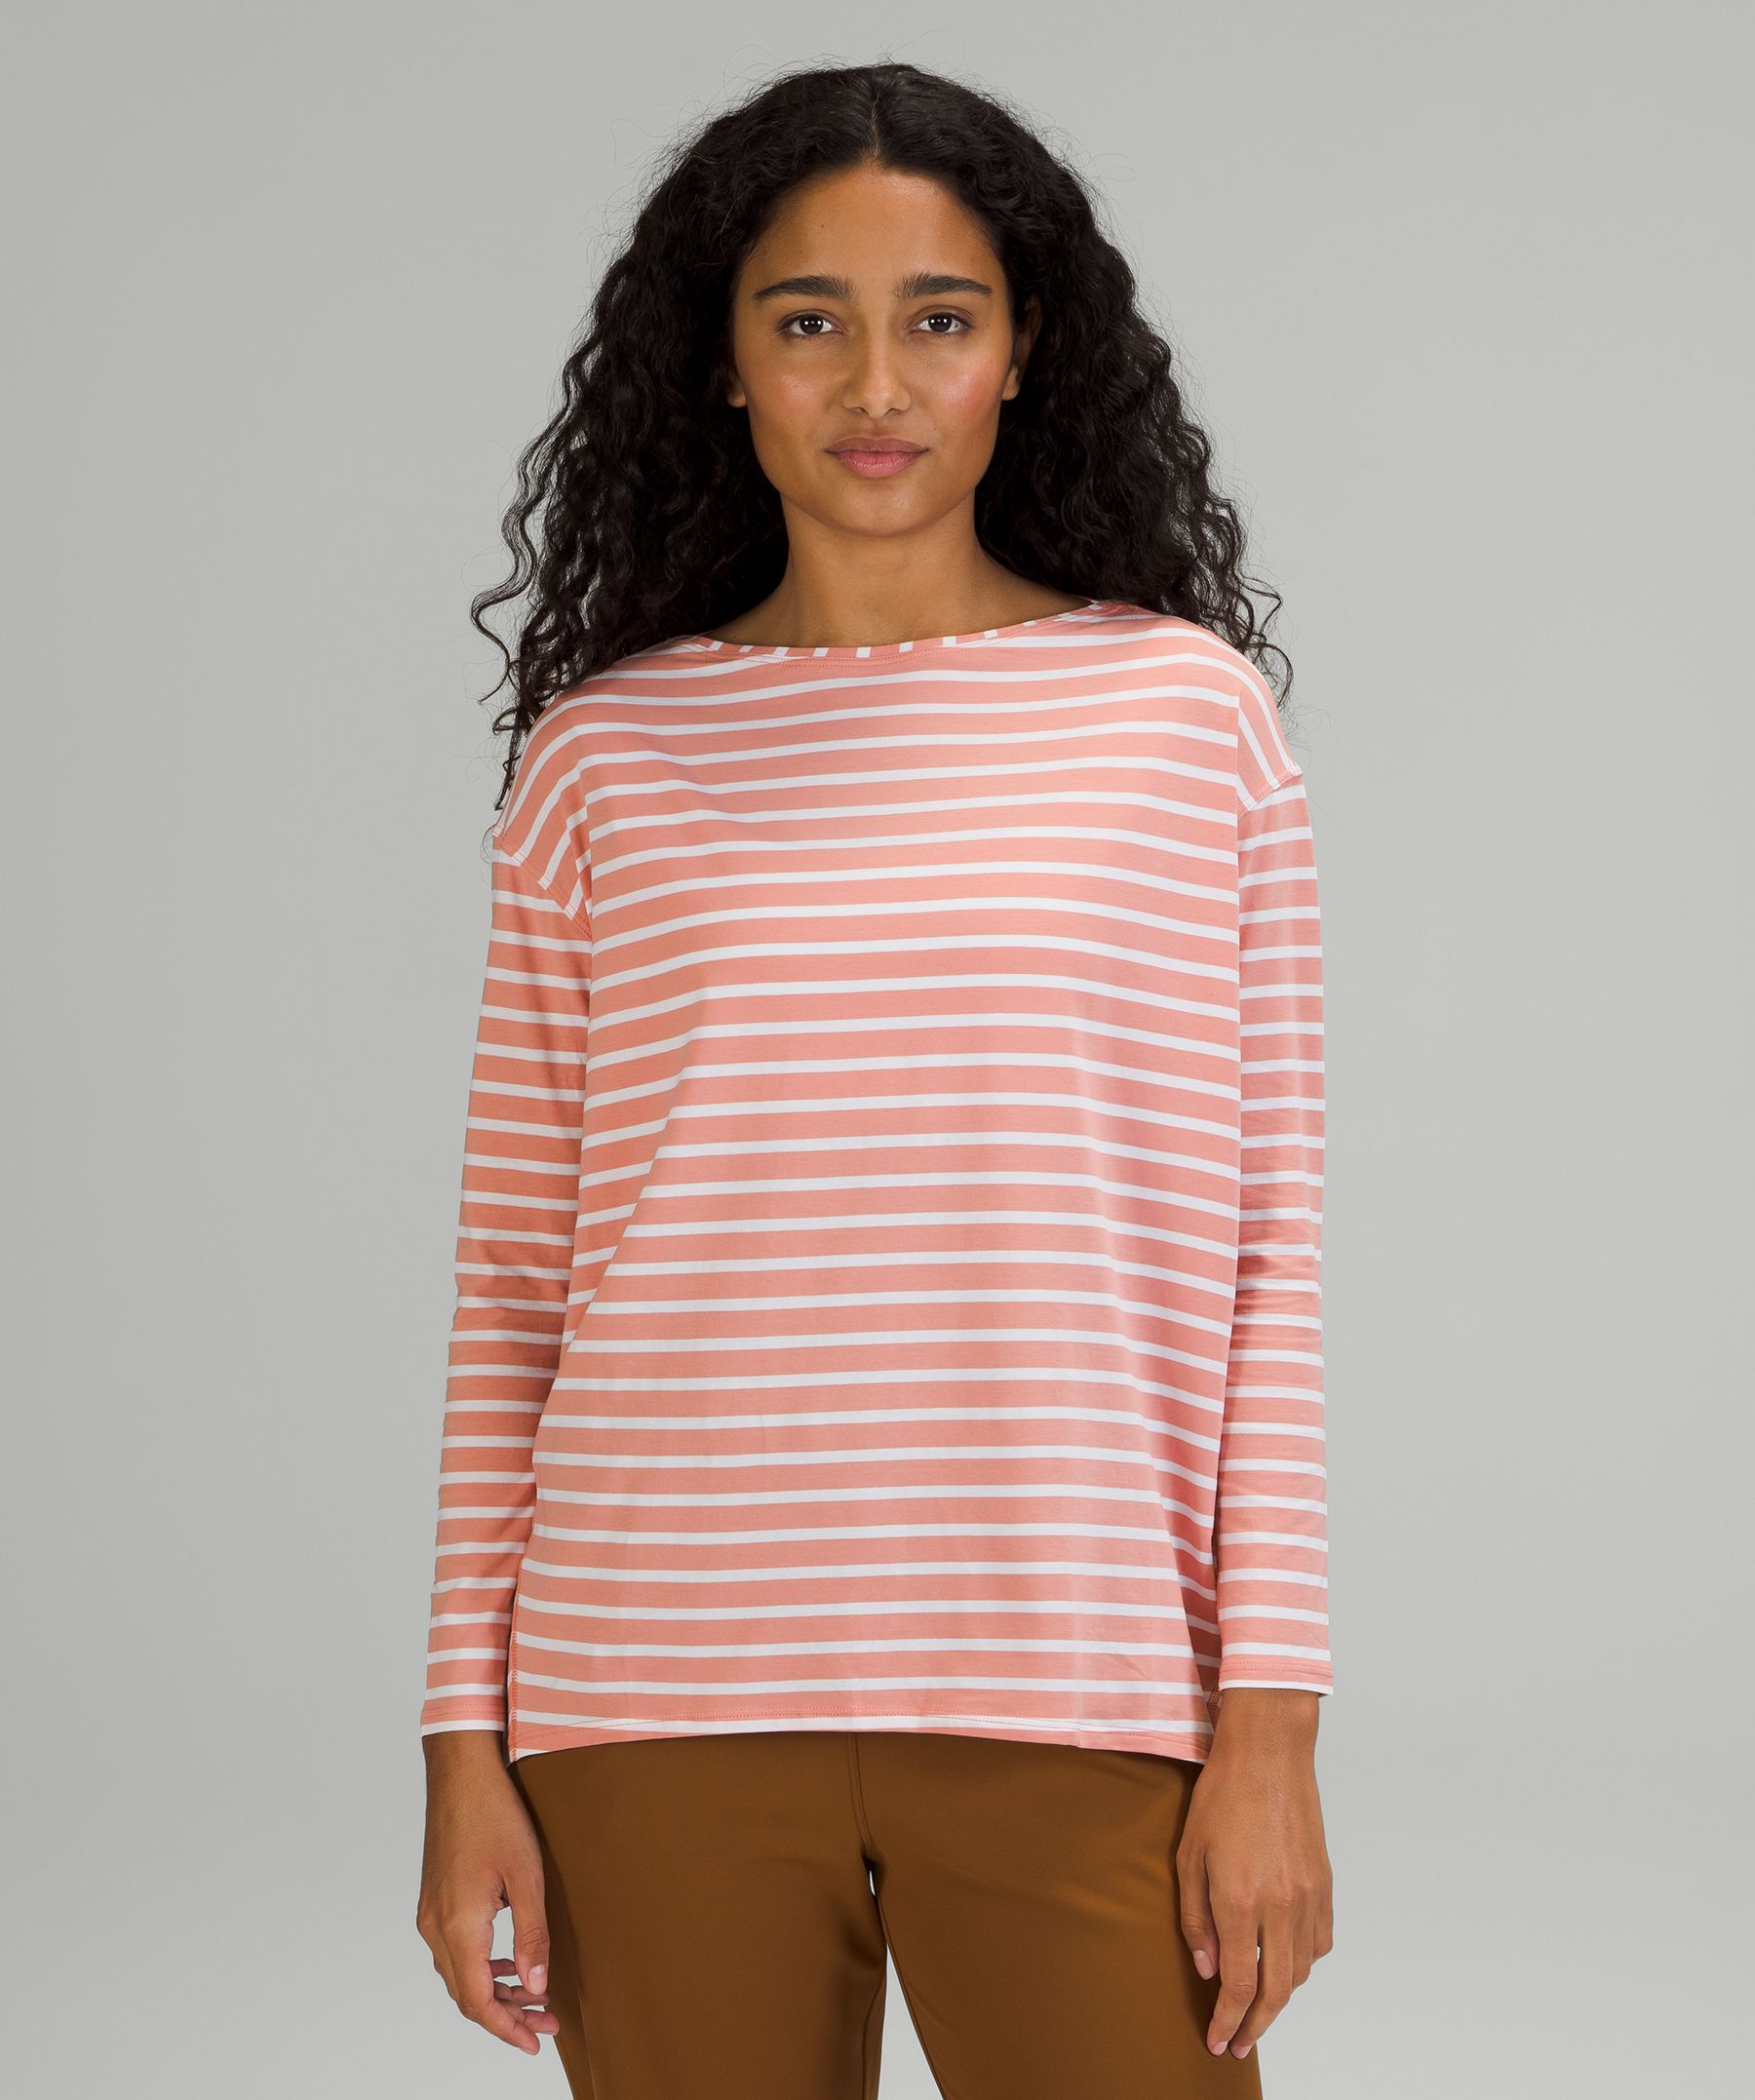 Lululemon Back In Action Long Sleeve Shirt In Yachtie Stripe Pink Pastel White